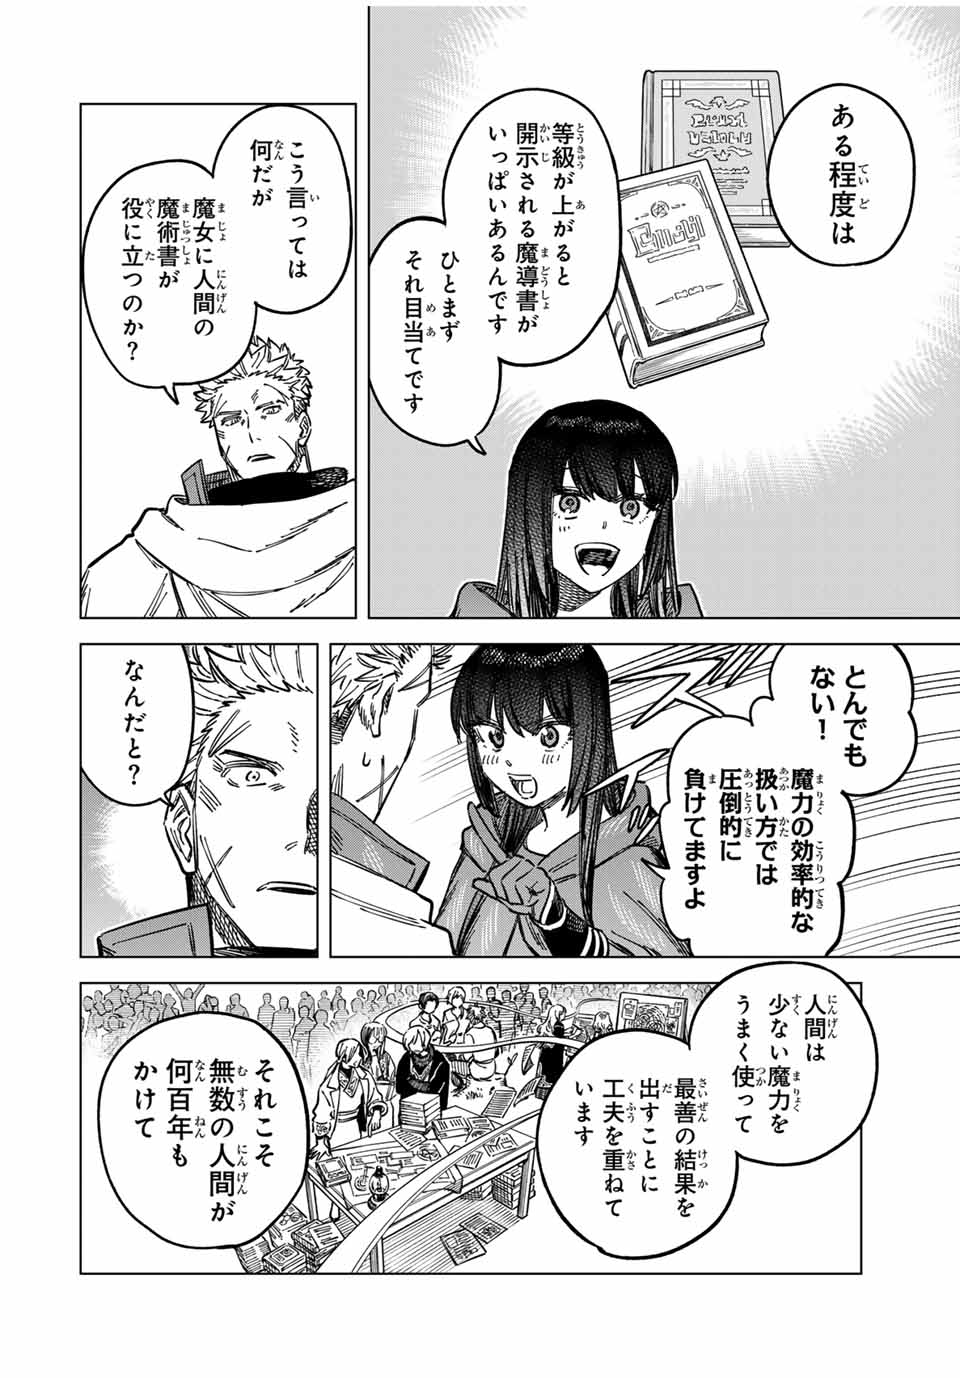 Witch and Mercenary 魔女と傭兵 第5.5話 - Page 8